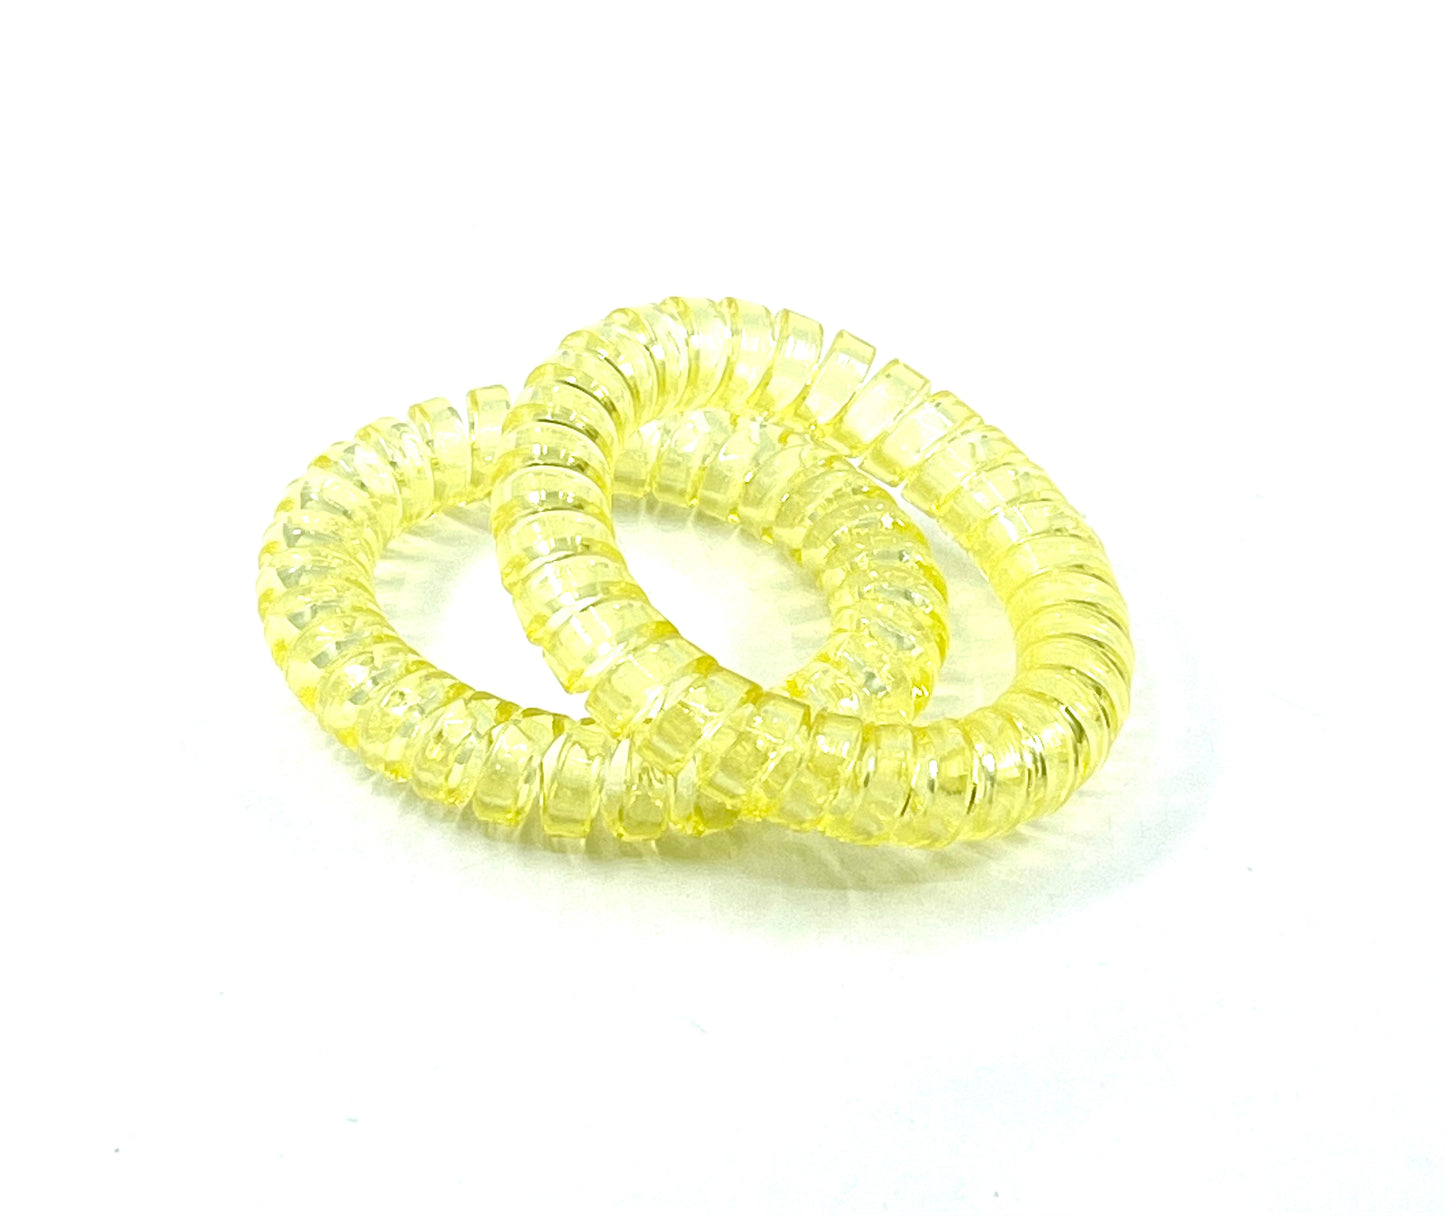 Large Spiral Hair Ties - translucent pale yellow